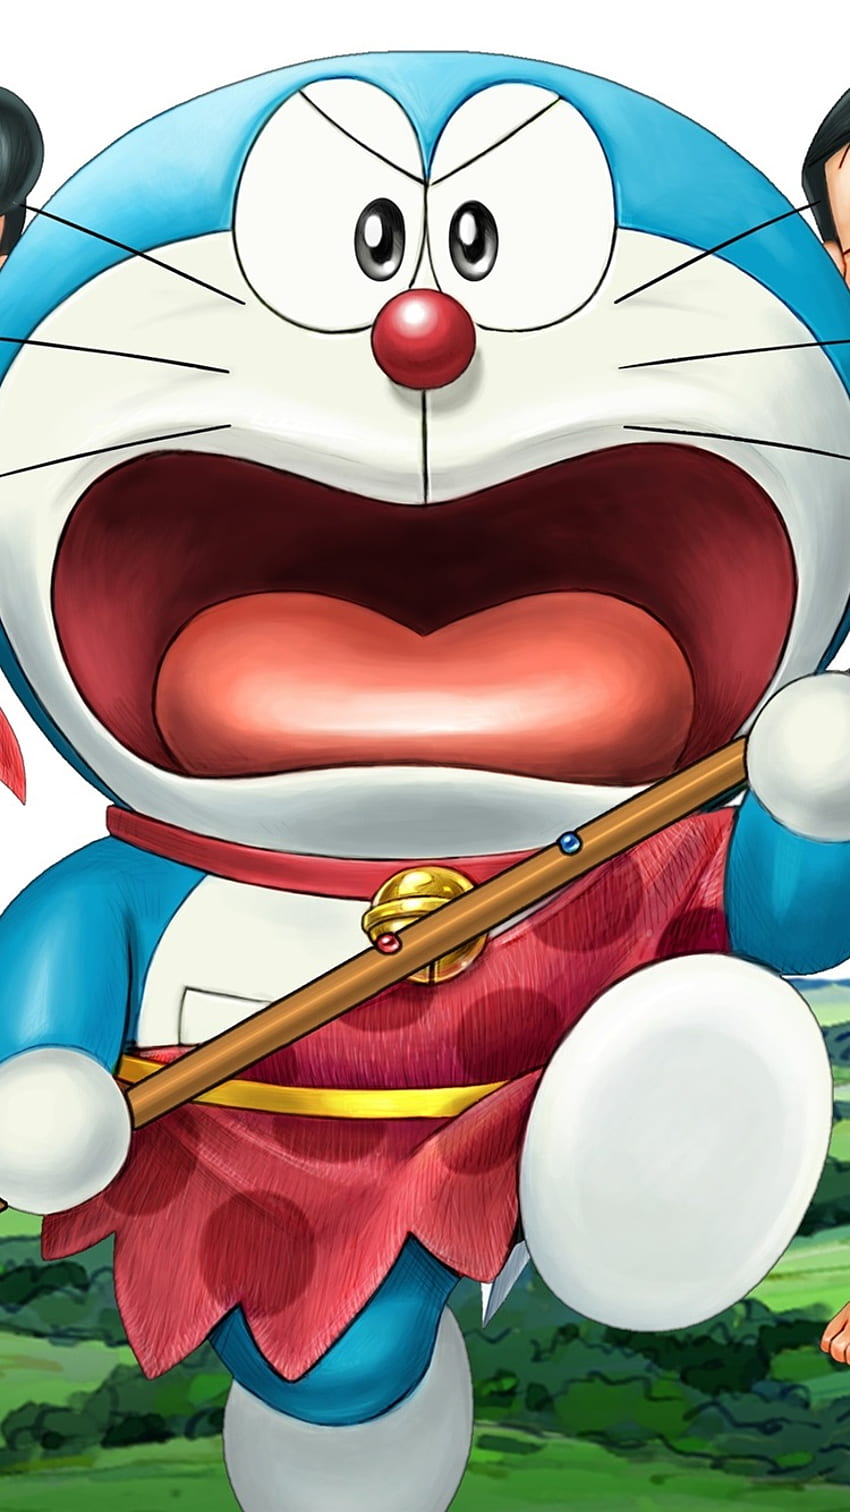 HD wallpaper Stand By Me Doraemon Movie HD Widescreen Wallpaper Doraemon  and Nobita wallpaper  Wallpaper Flare